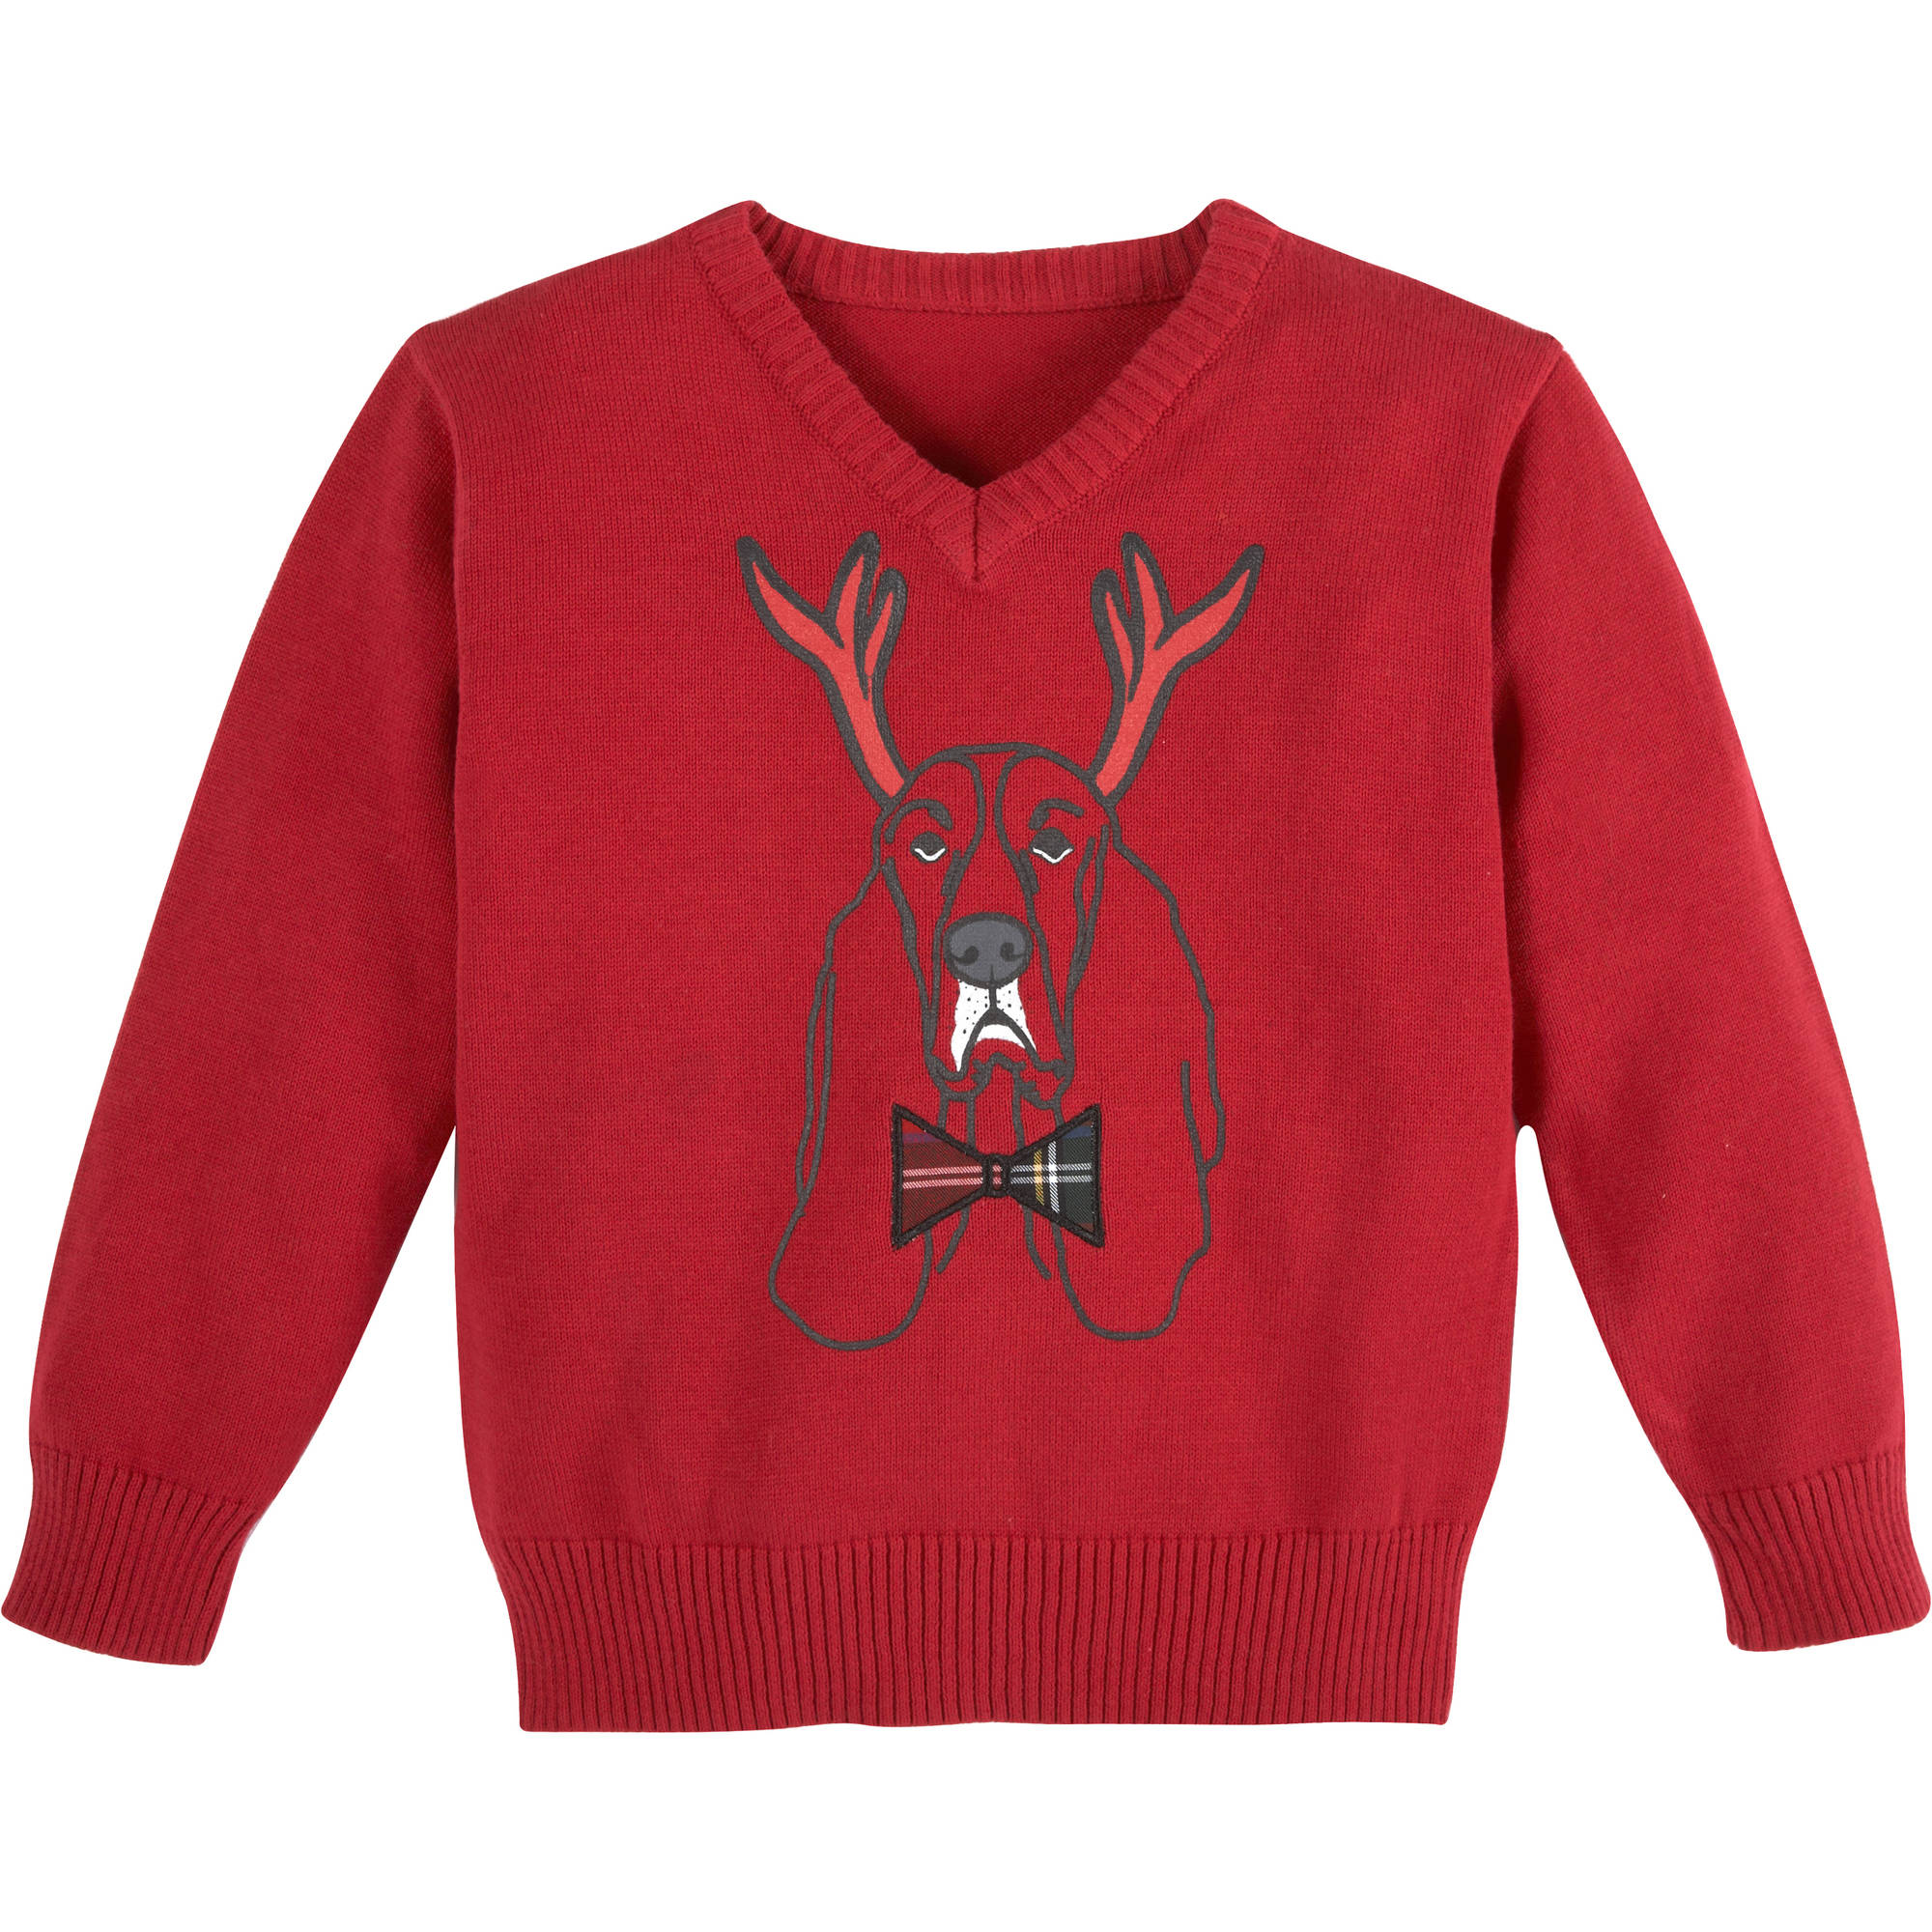 Boys Red Reindeer Dog Sweater - image 2 of 2